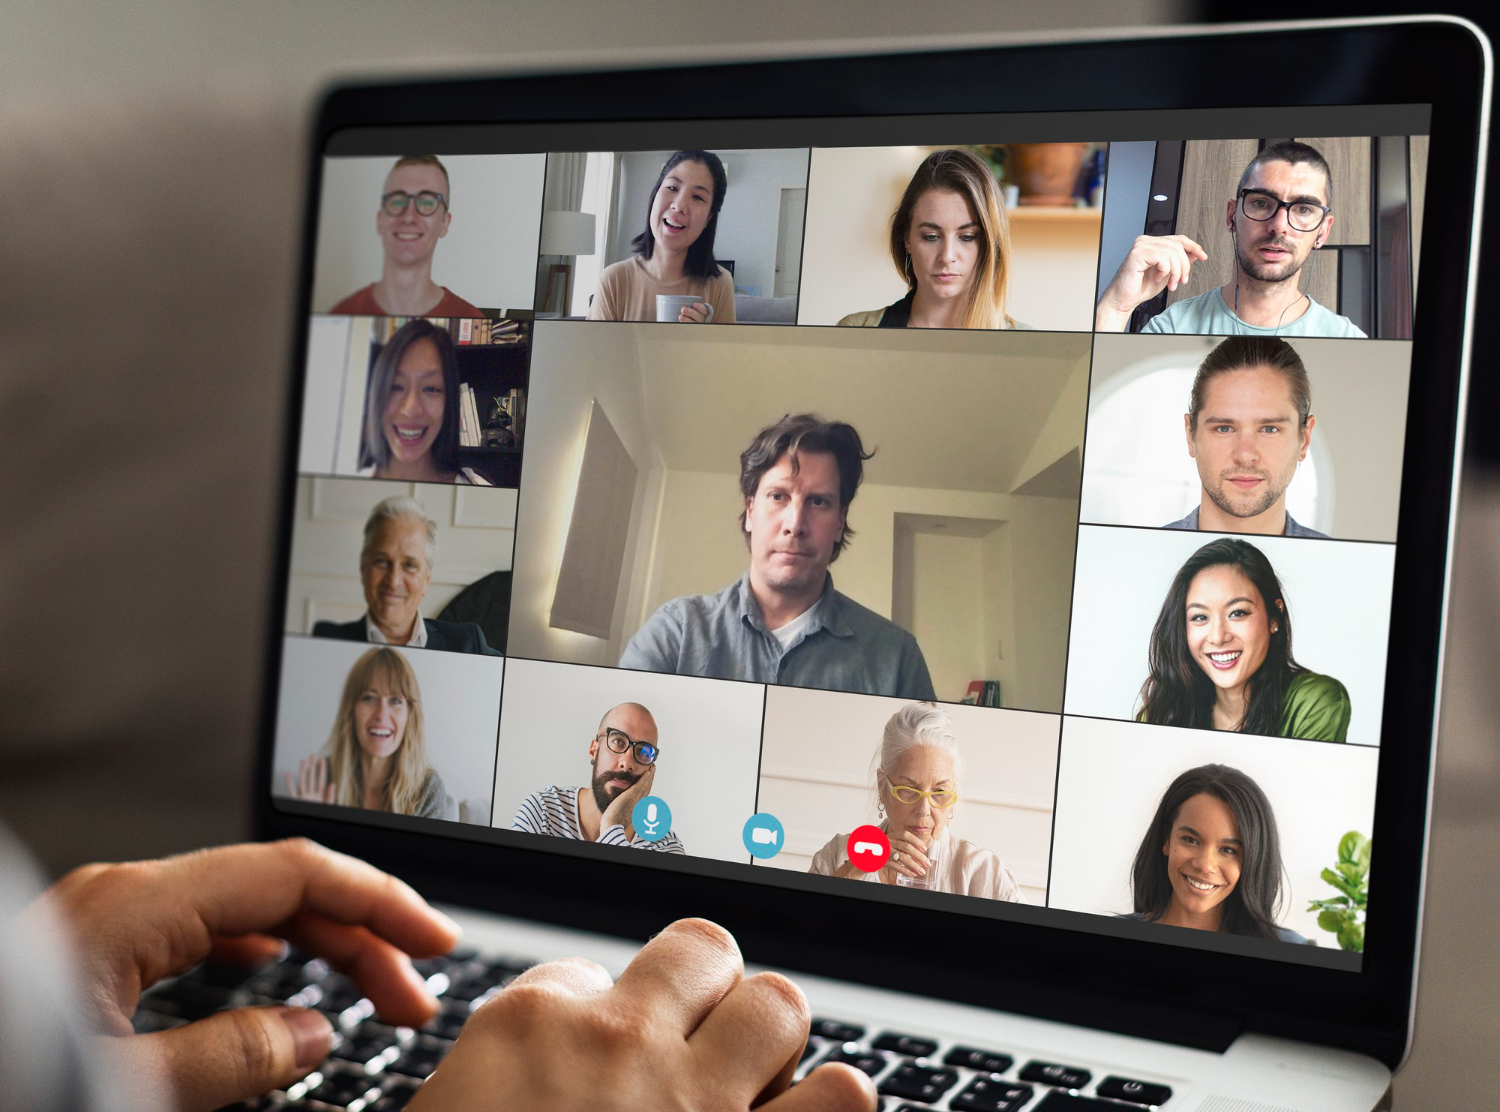 Best video conferencing software